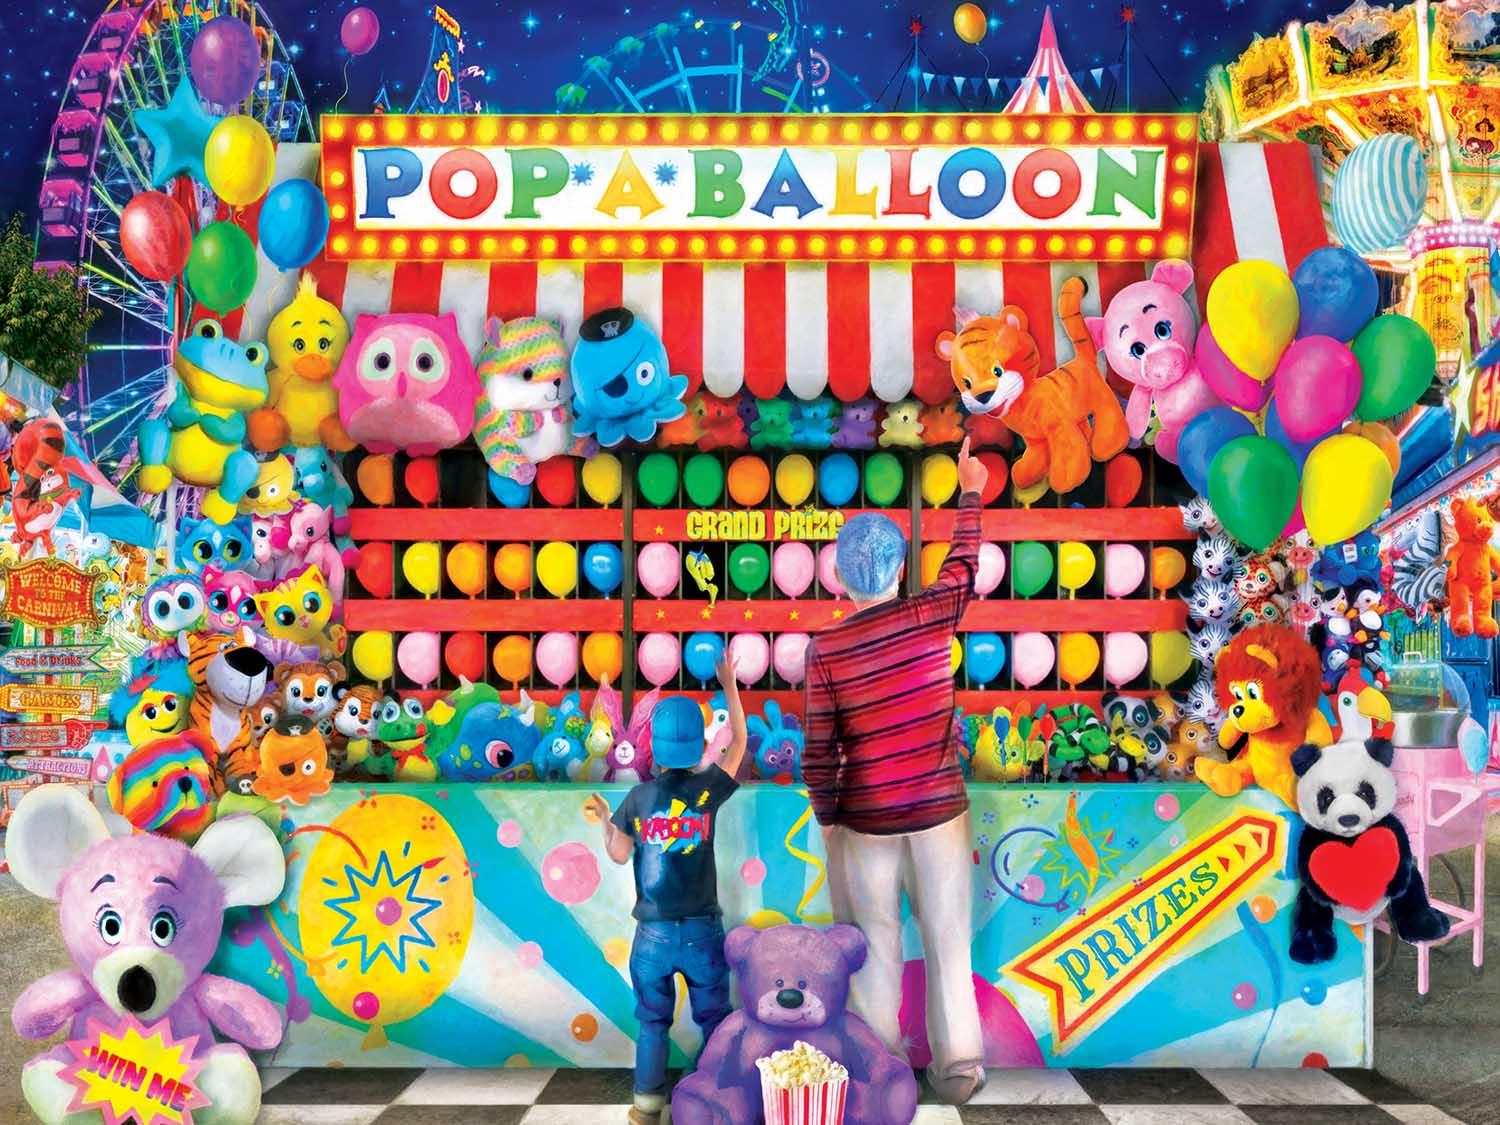 Winning Throws Carnival & Circus Jigsaw Puzzle